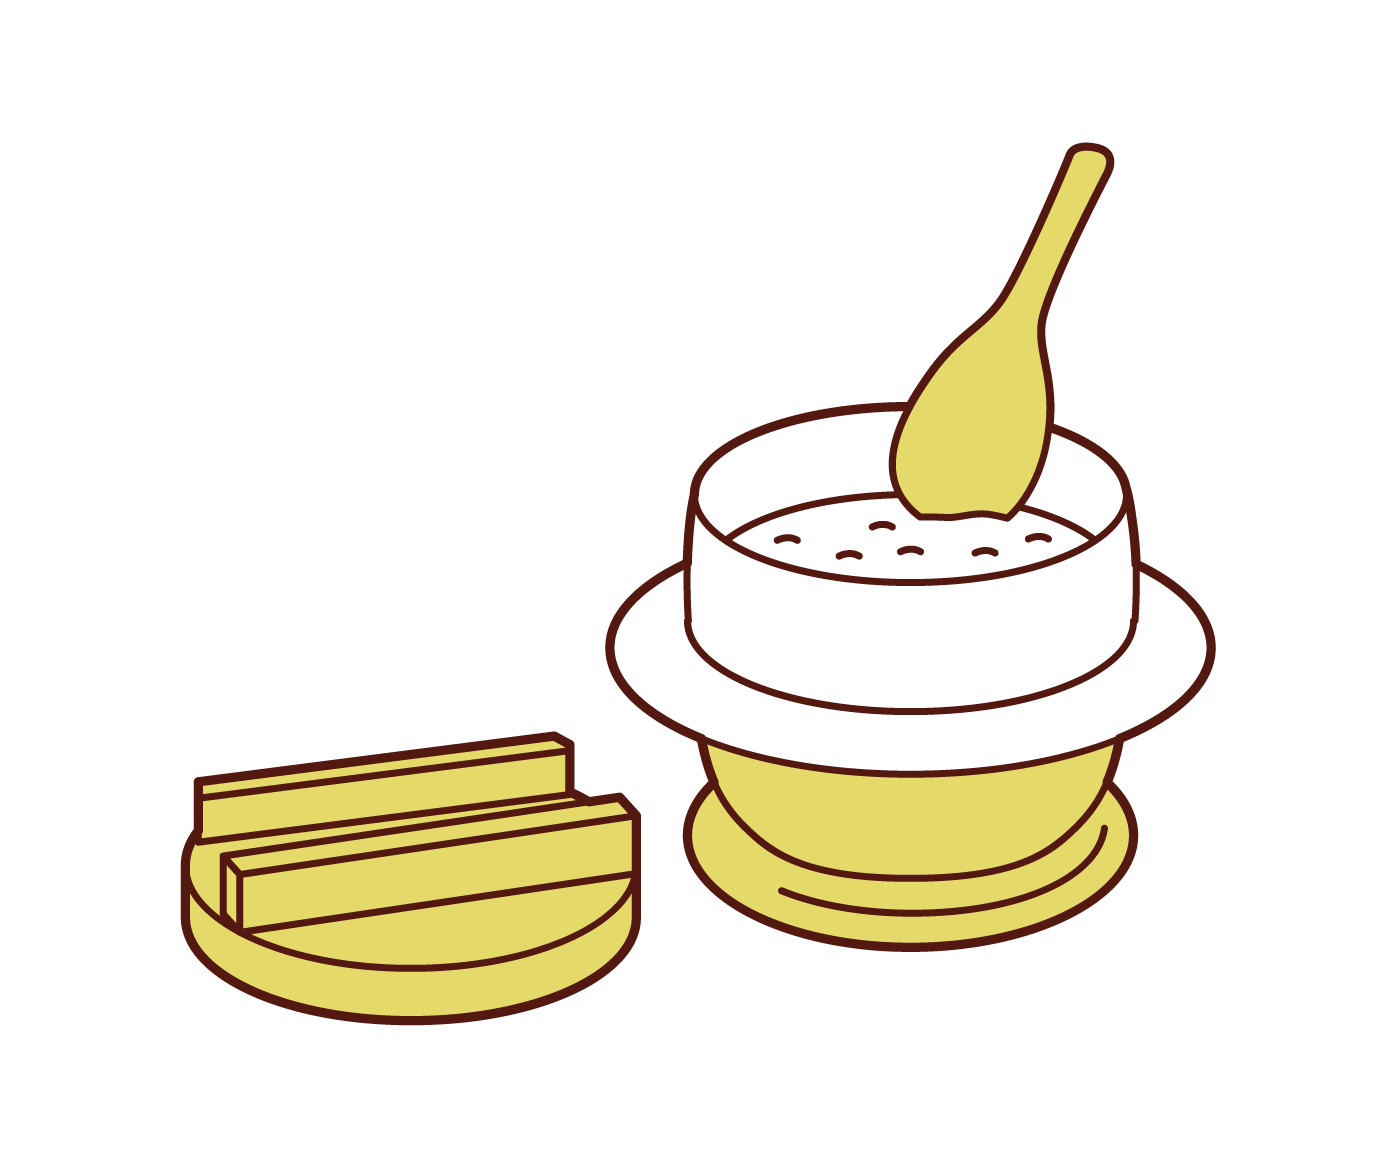 Illustration of rice cooked in a kettle